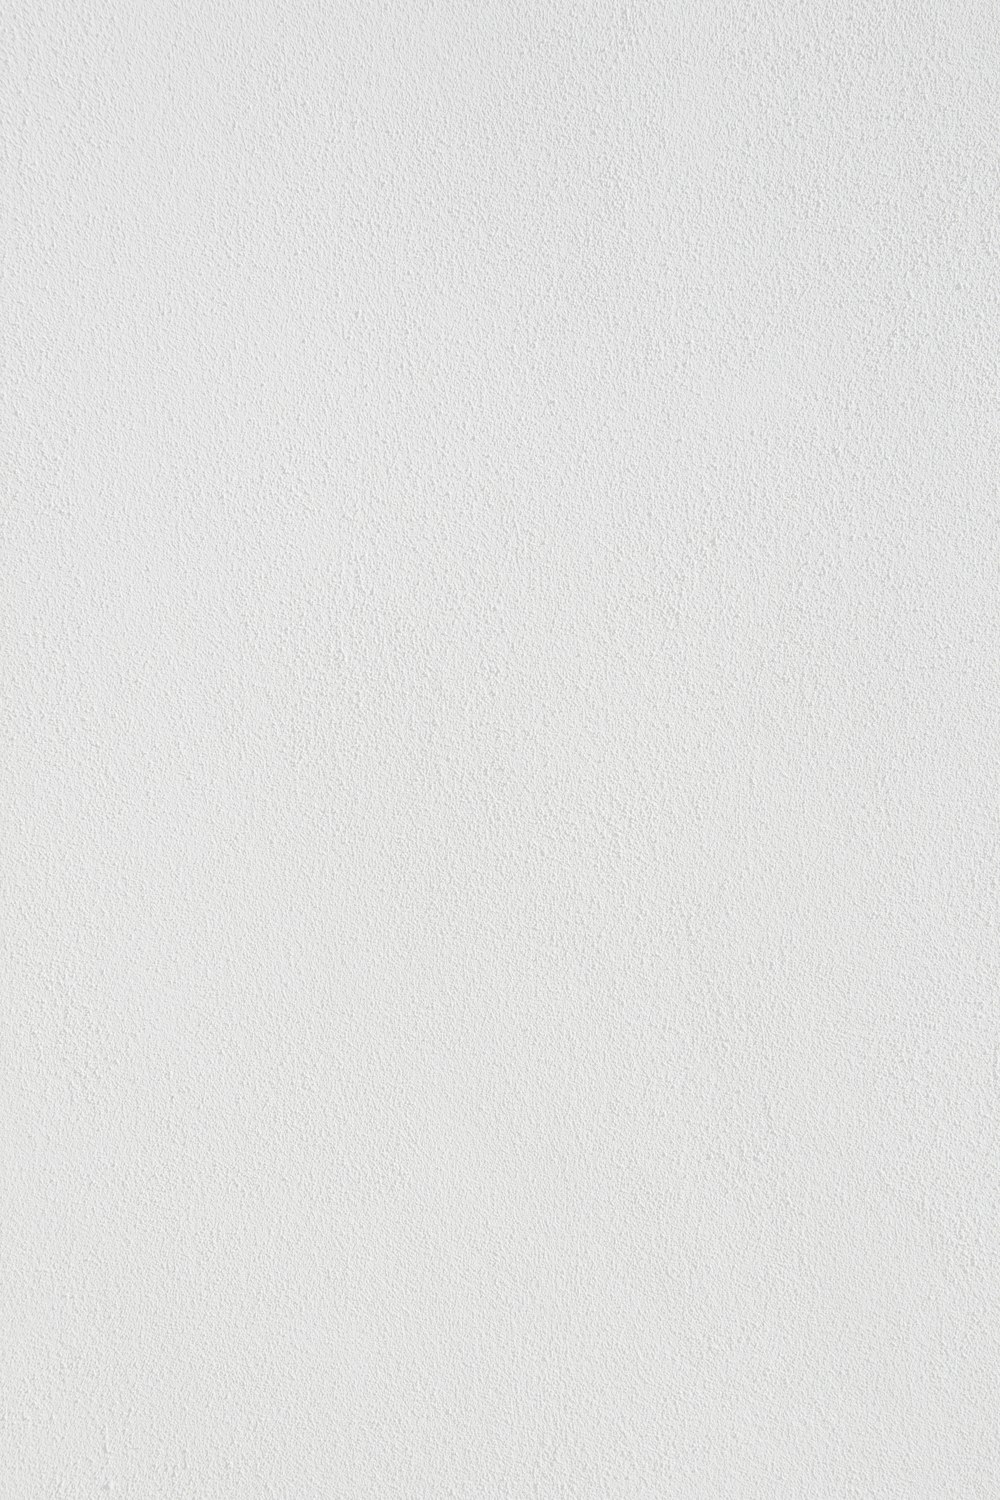 white wall paint with black line